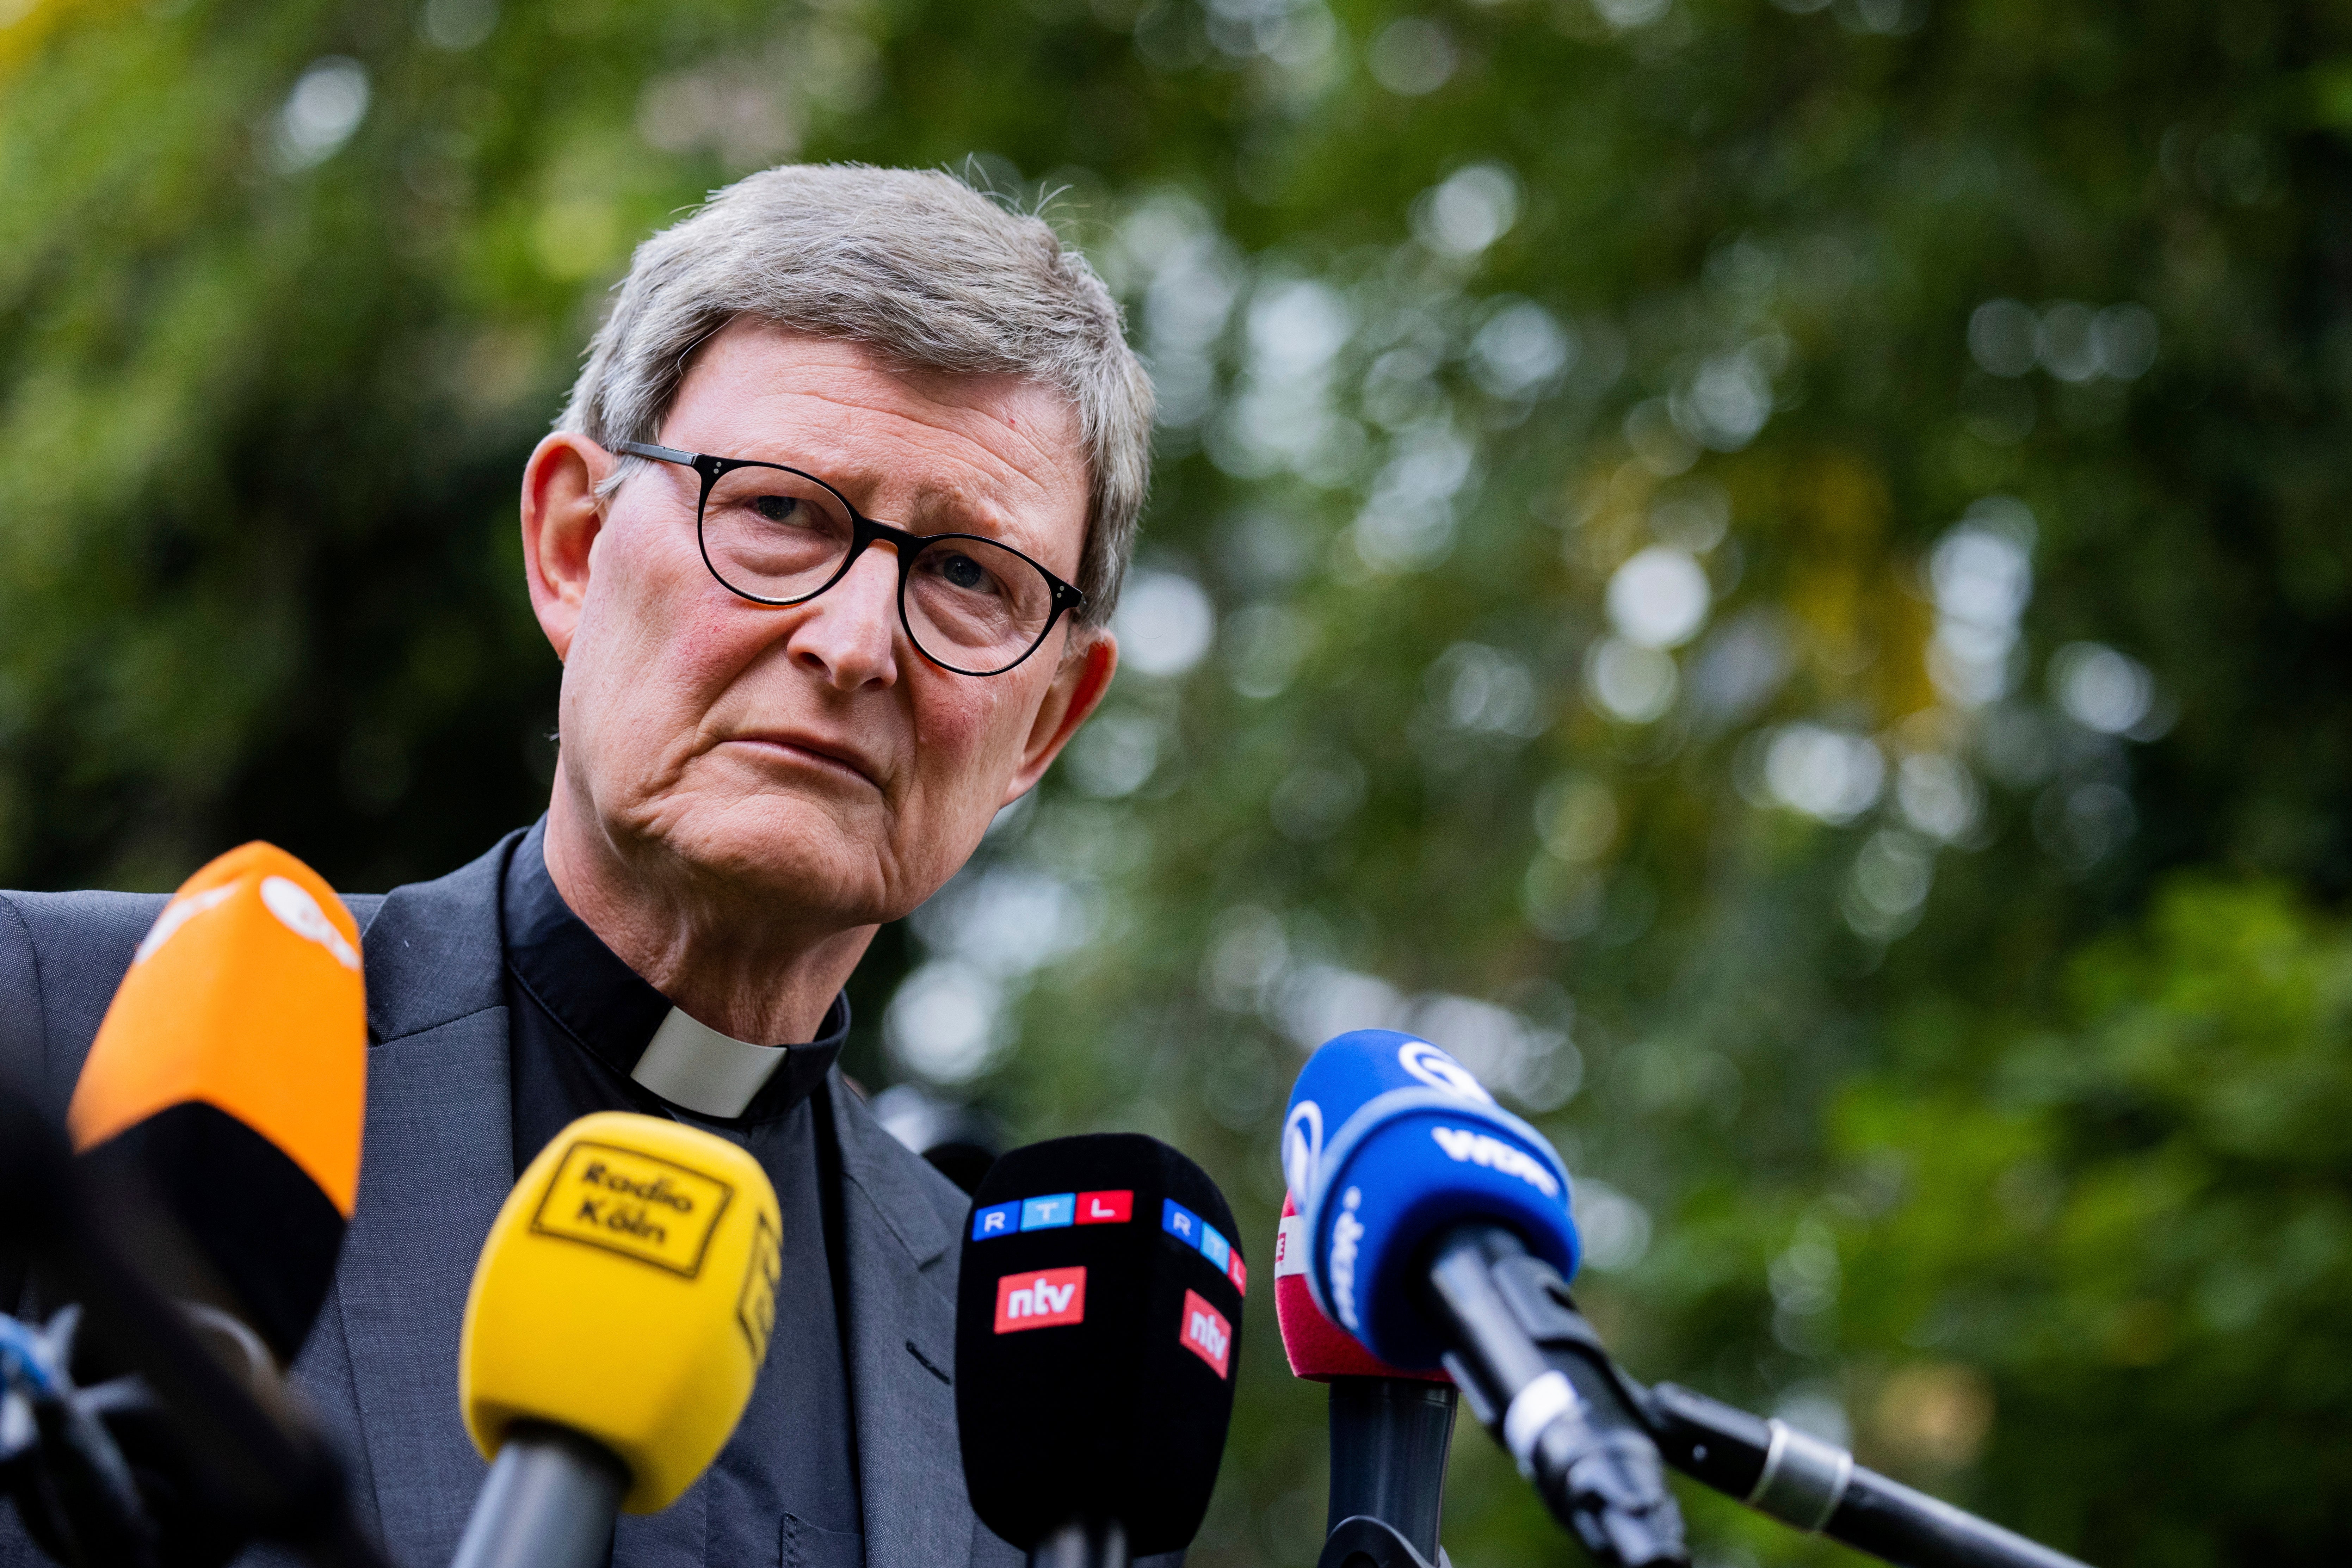 Cardinal Rainer Maria Woelki makes a statement in the garden of the Archbishop's House in Cologne